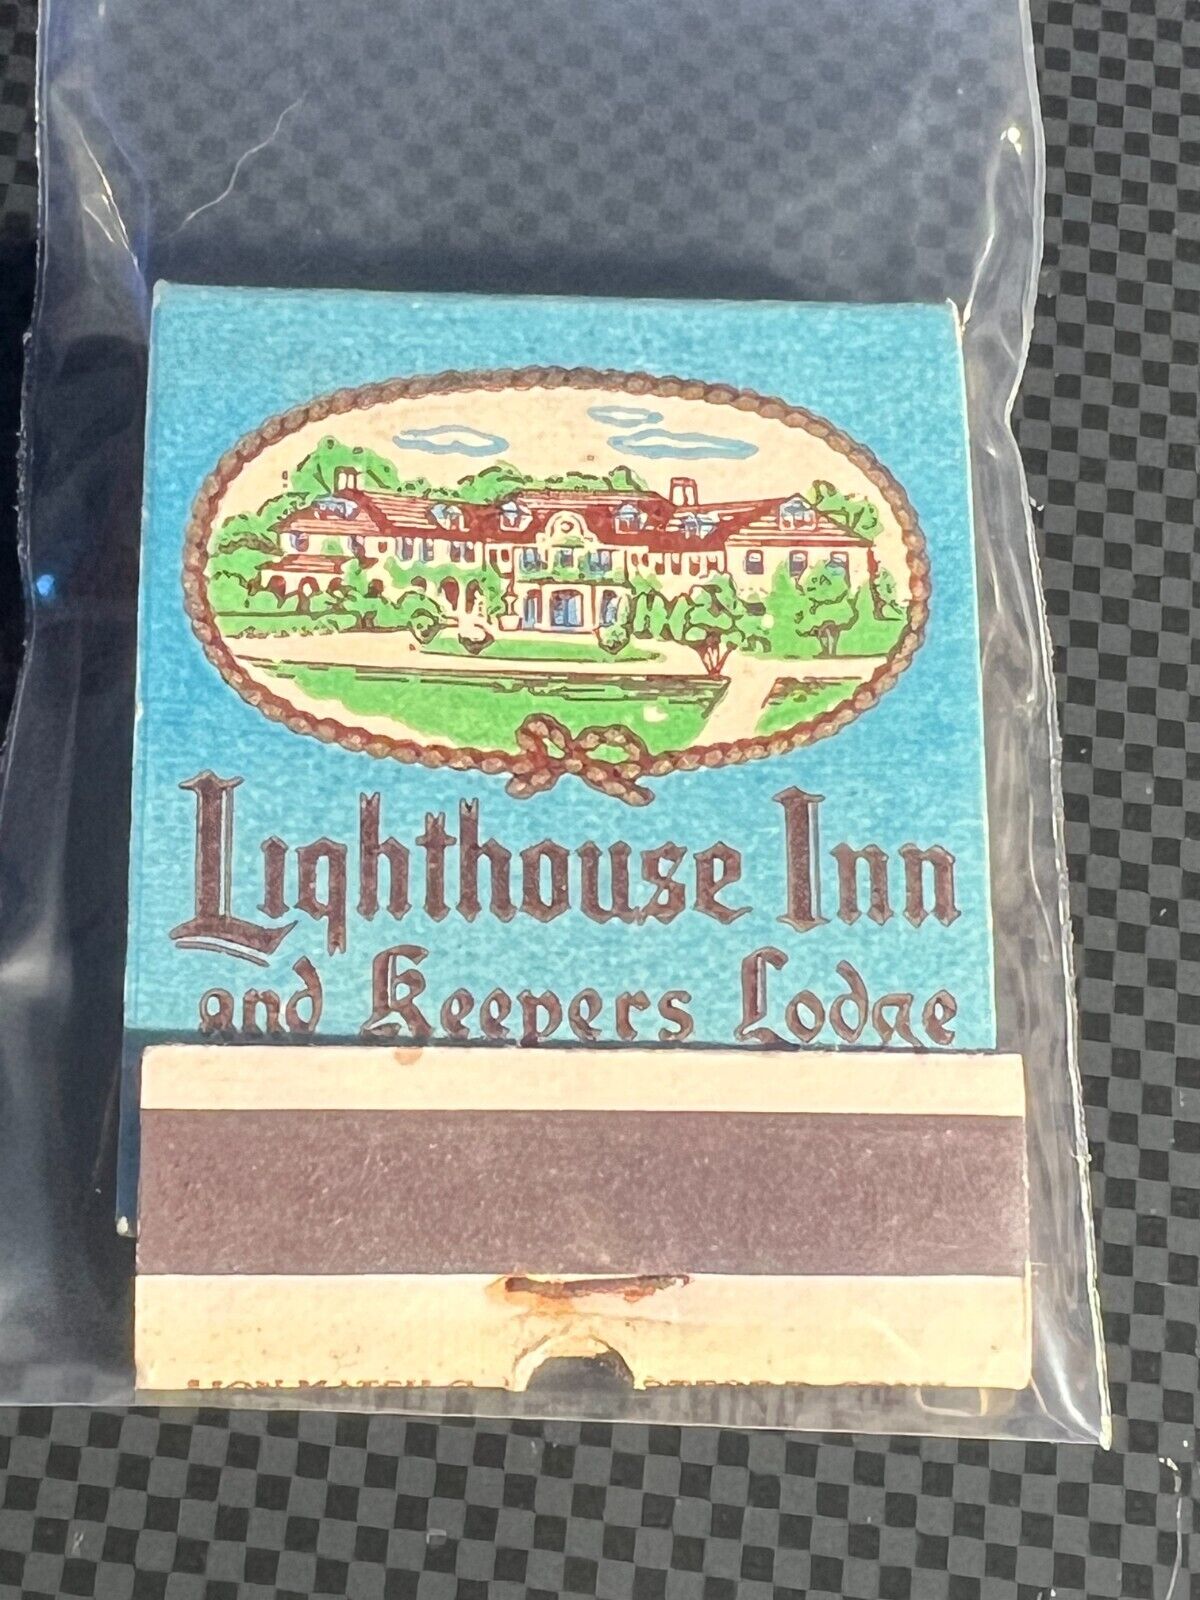 20 STRIKE MATCHBOOK - LIGHTHOUSE INN AND KEEPERS LODGE - NEW LONDON CT UNSTRUCK